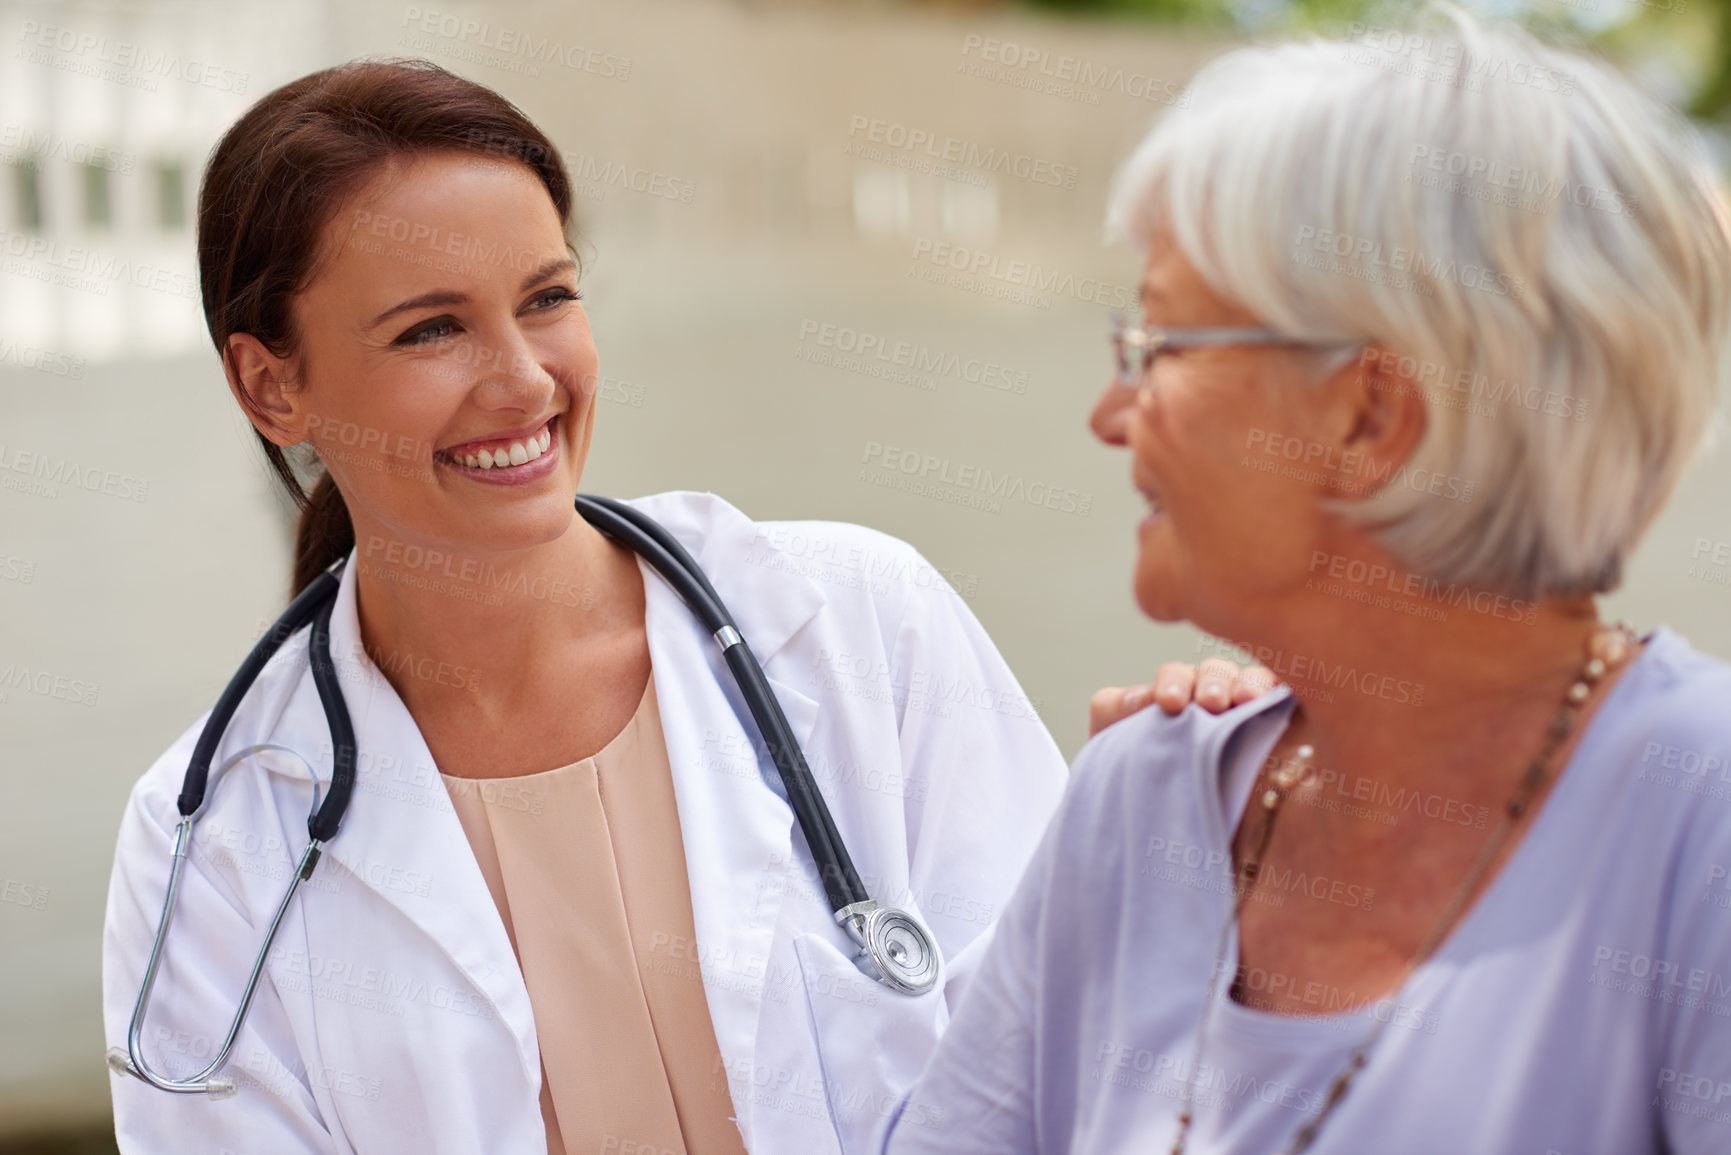 Buy stock photo Shot of a smiling doctor conversing with a senior patient